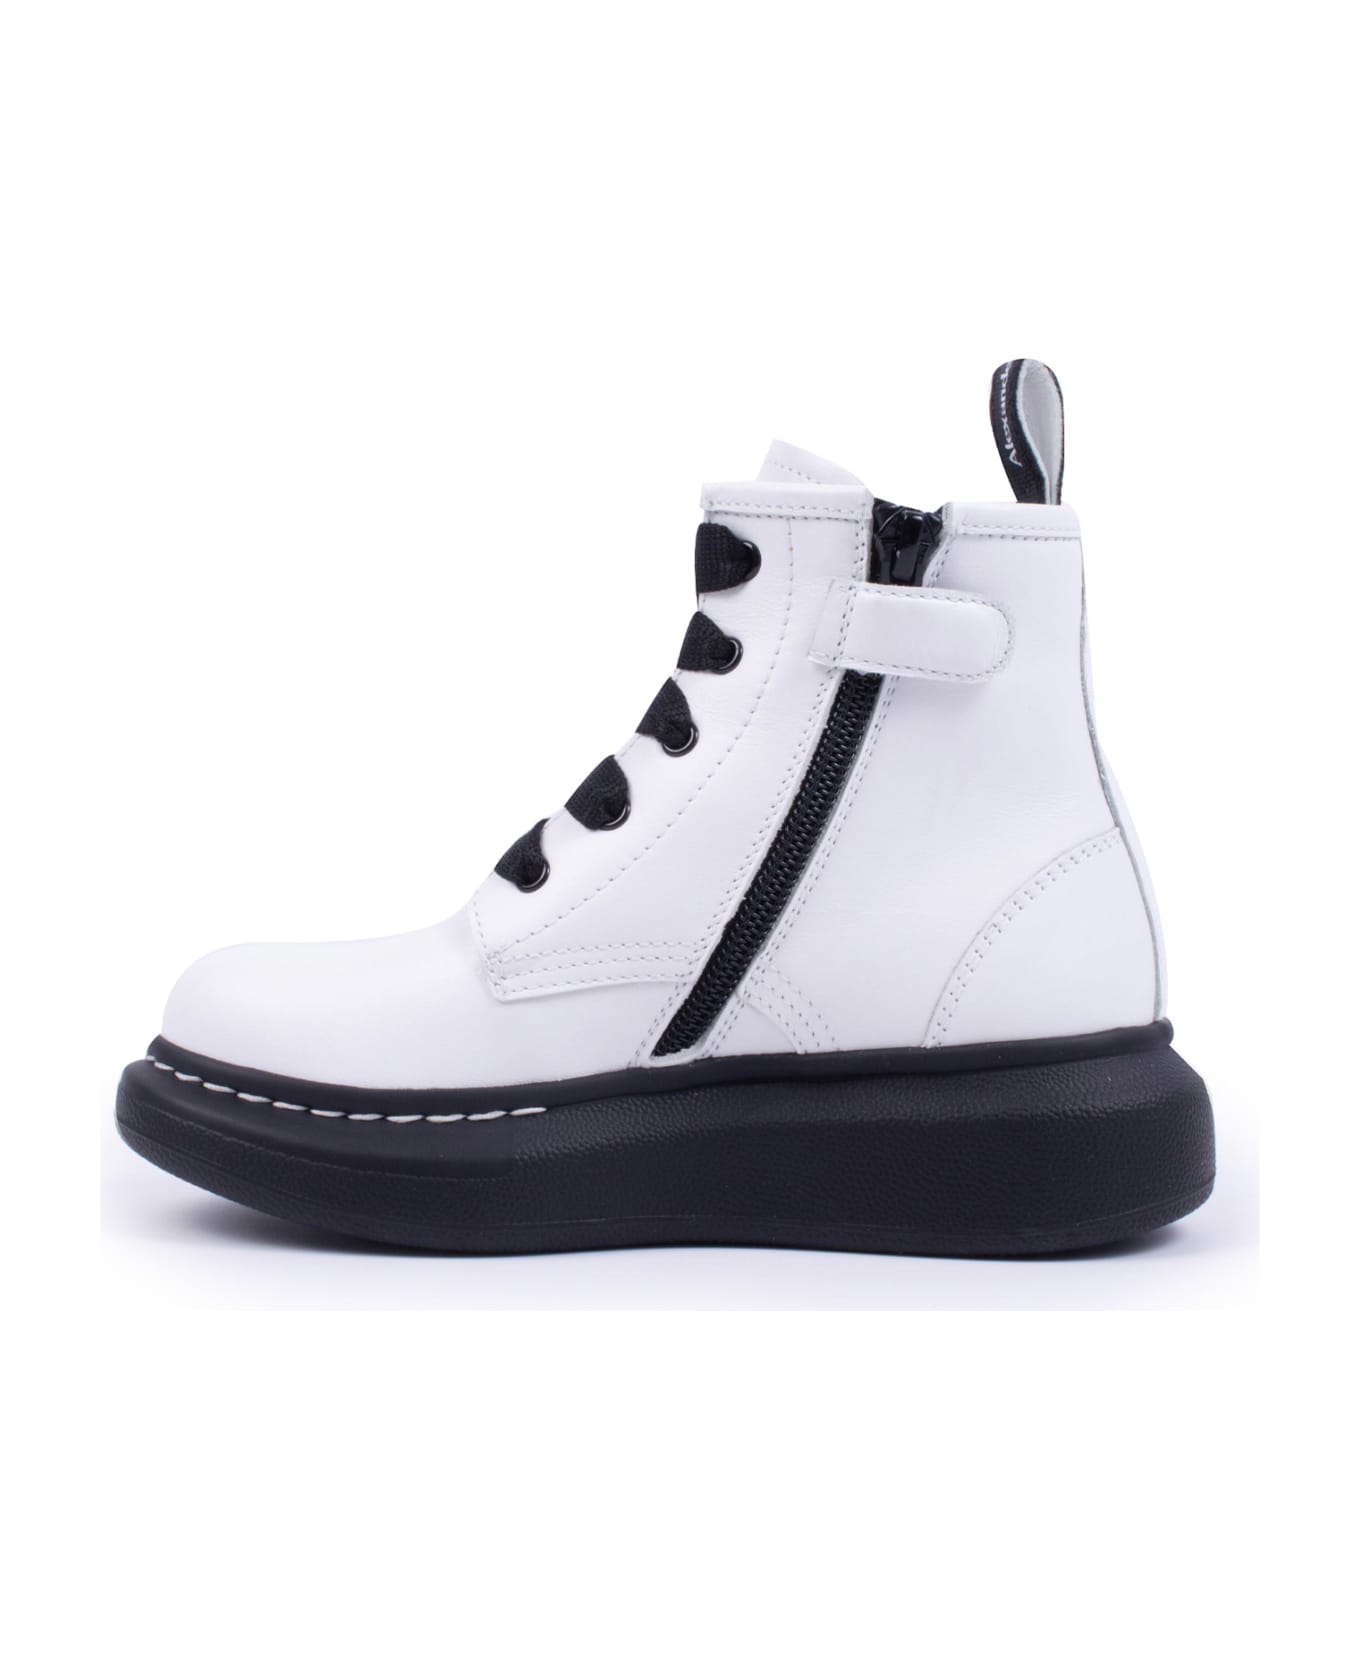 Alexander McQueen Leather Boots - White シューズ